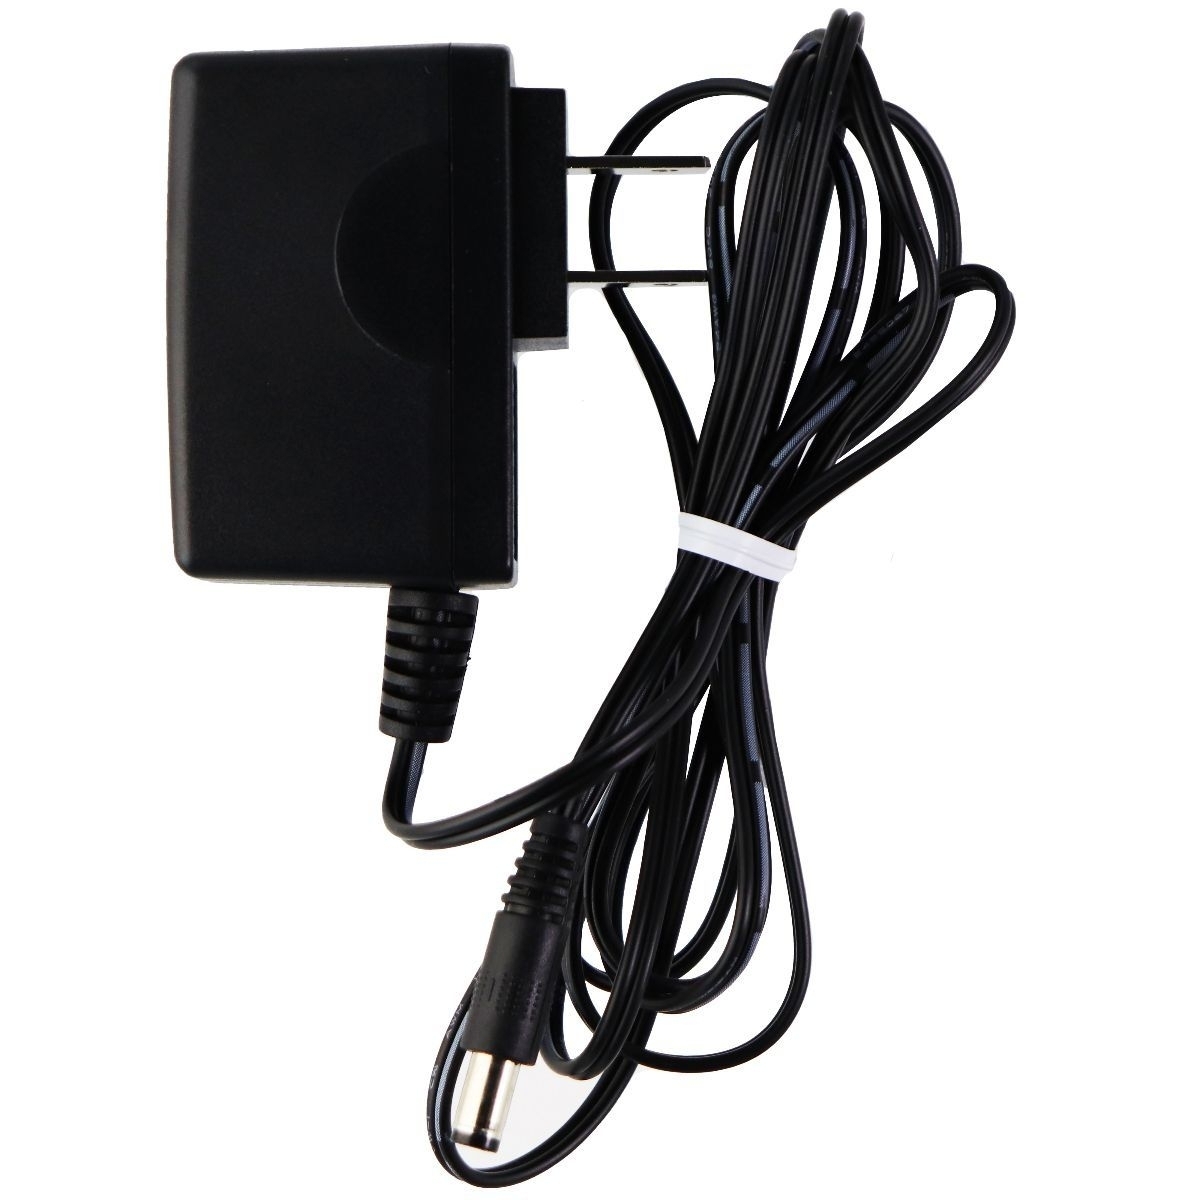 Yealink (5V/0.6A) AC Adapter Wall Charger - Black (YLPS050600C) (Refurbished)